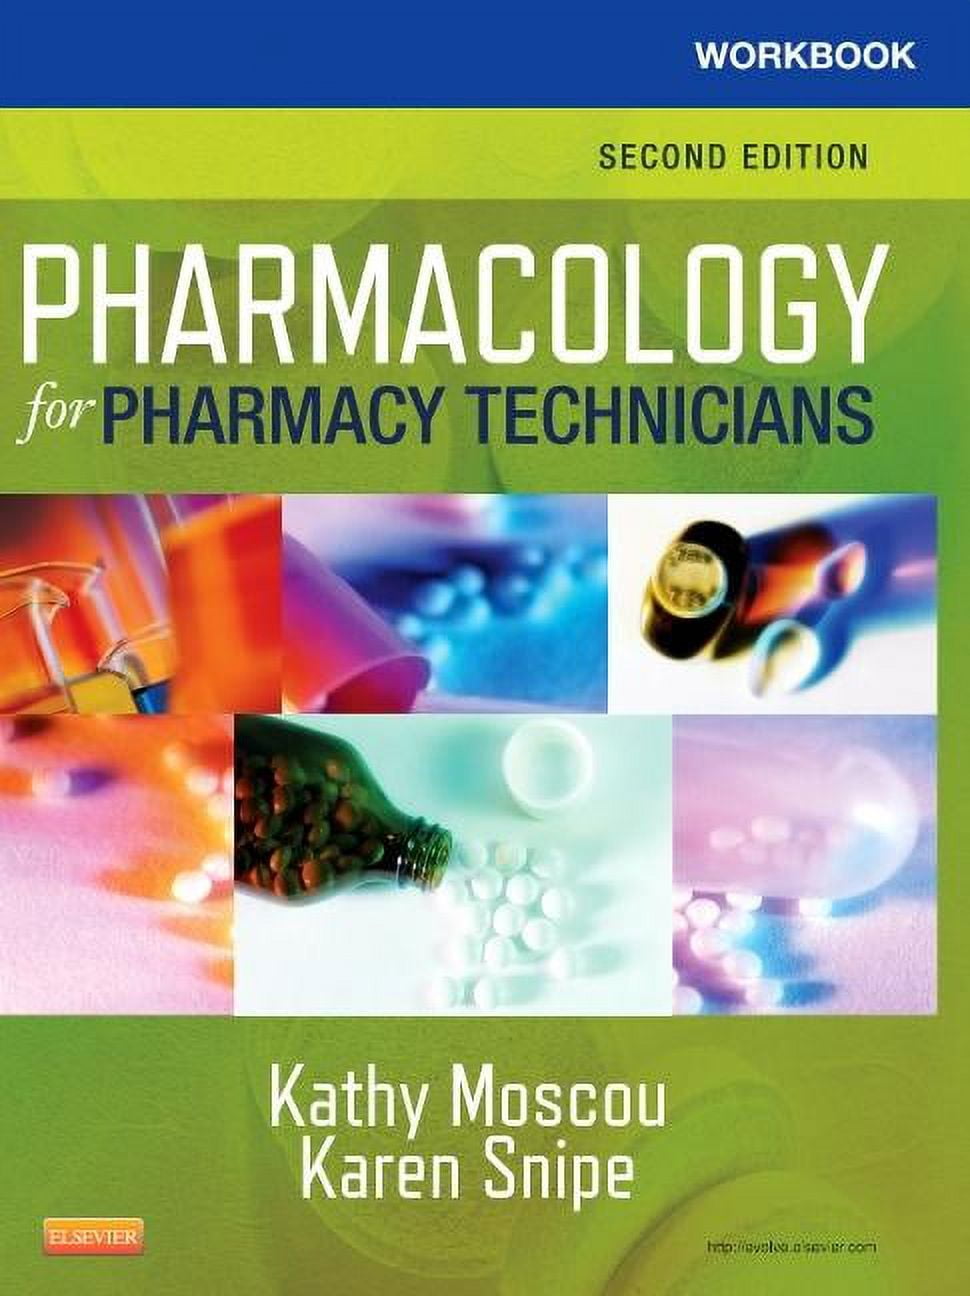 Workbook for Pharmacology for Pharmacy Technicians (Paperback ...